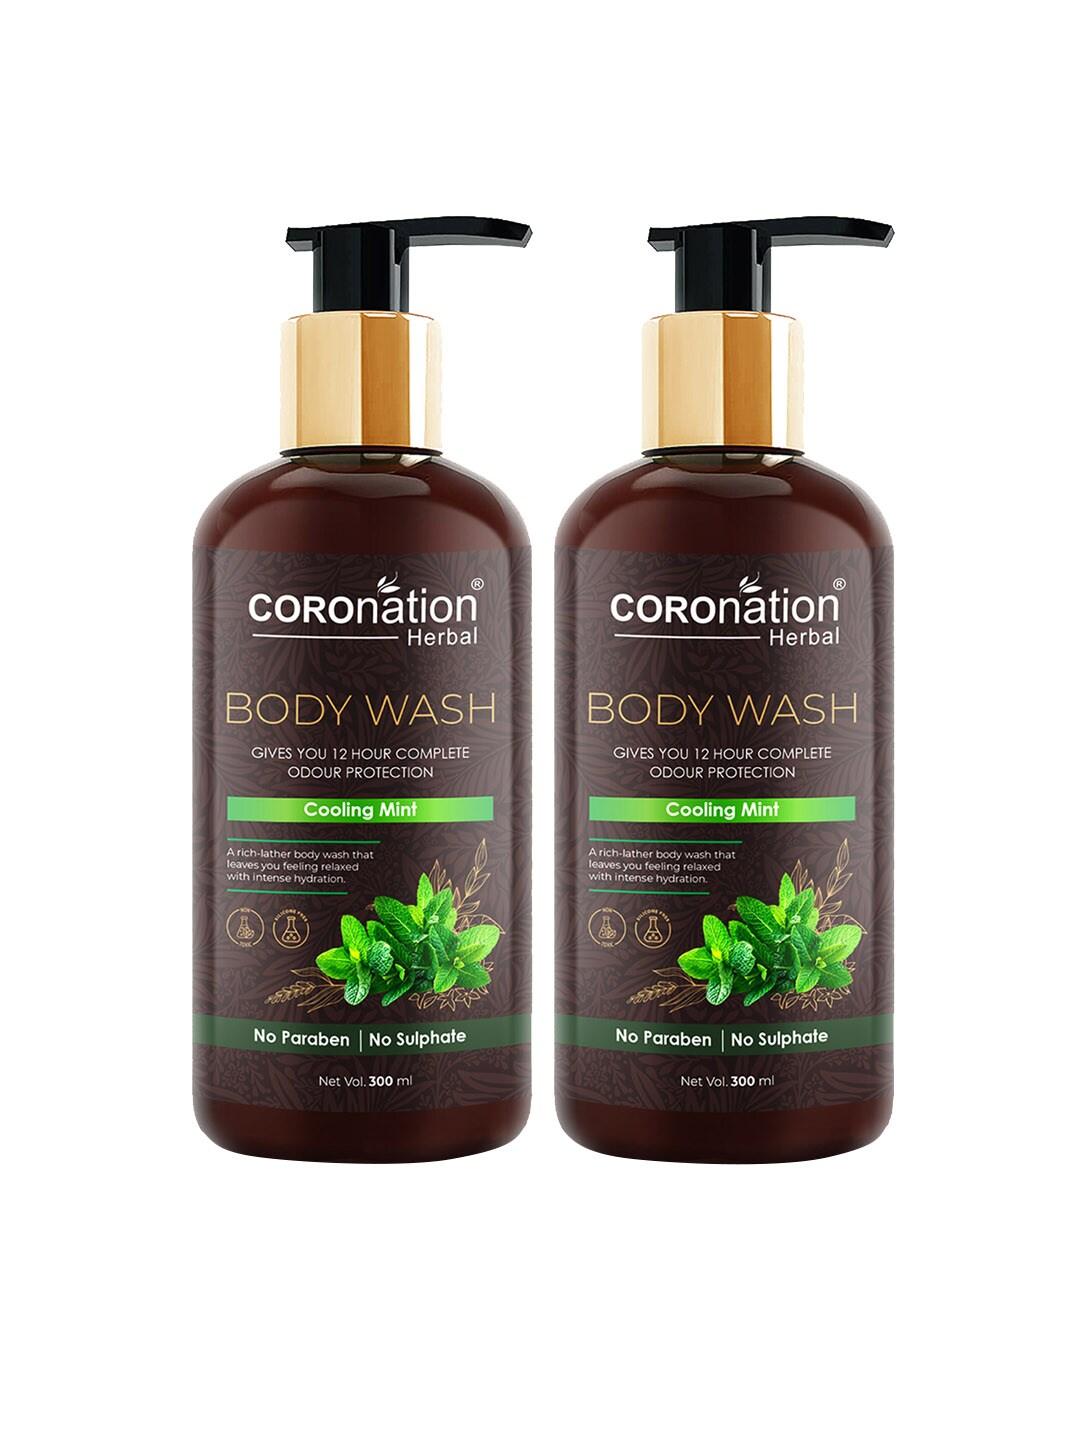 COROnation Herbal Set of 2 Cooling Mint Body Wash 300 ml Each